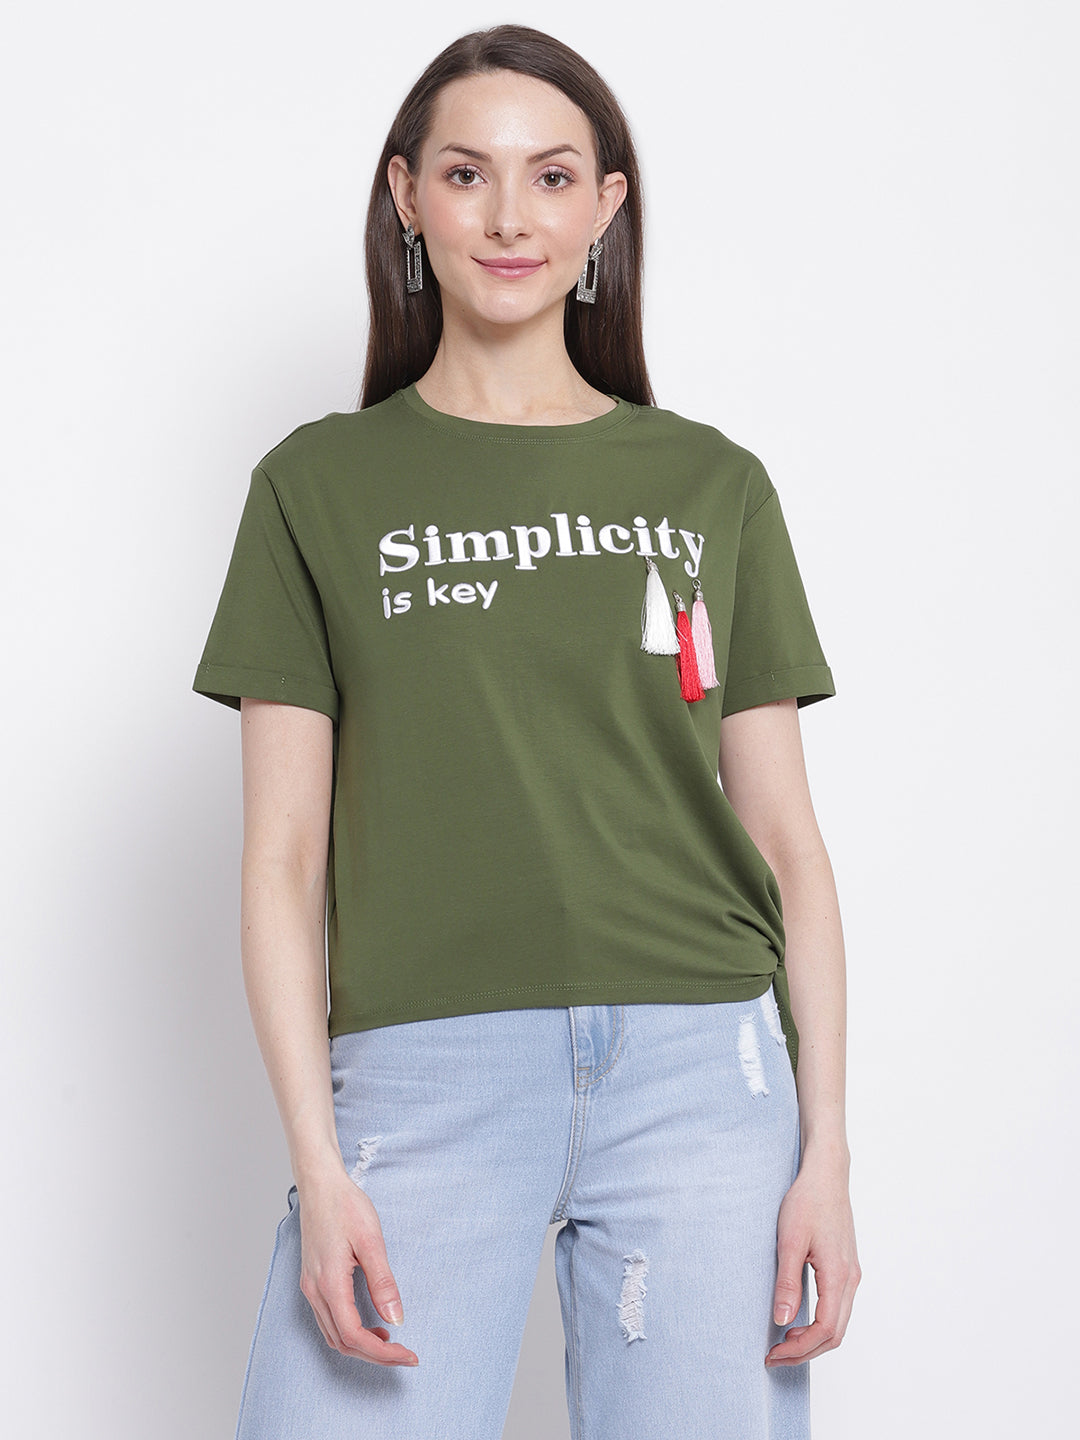 Women Olive Green Print T-Shirt with Knot Details at Hem